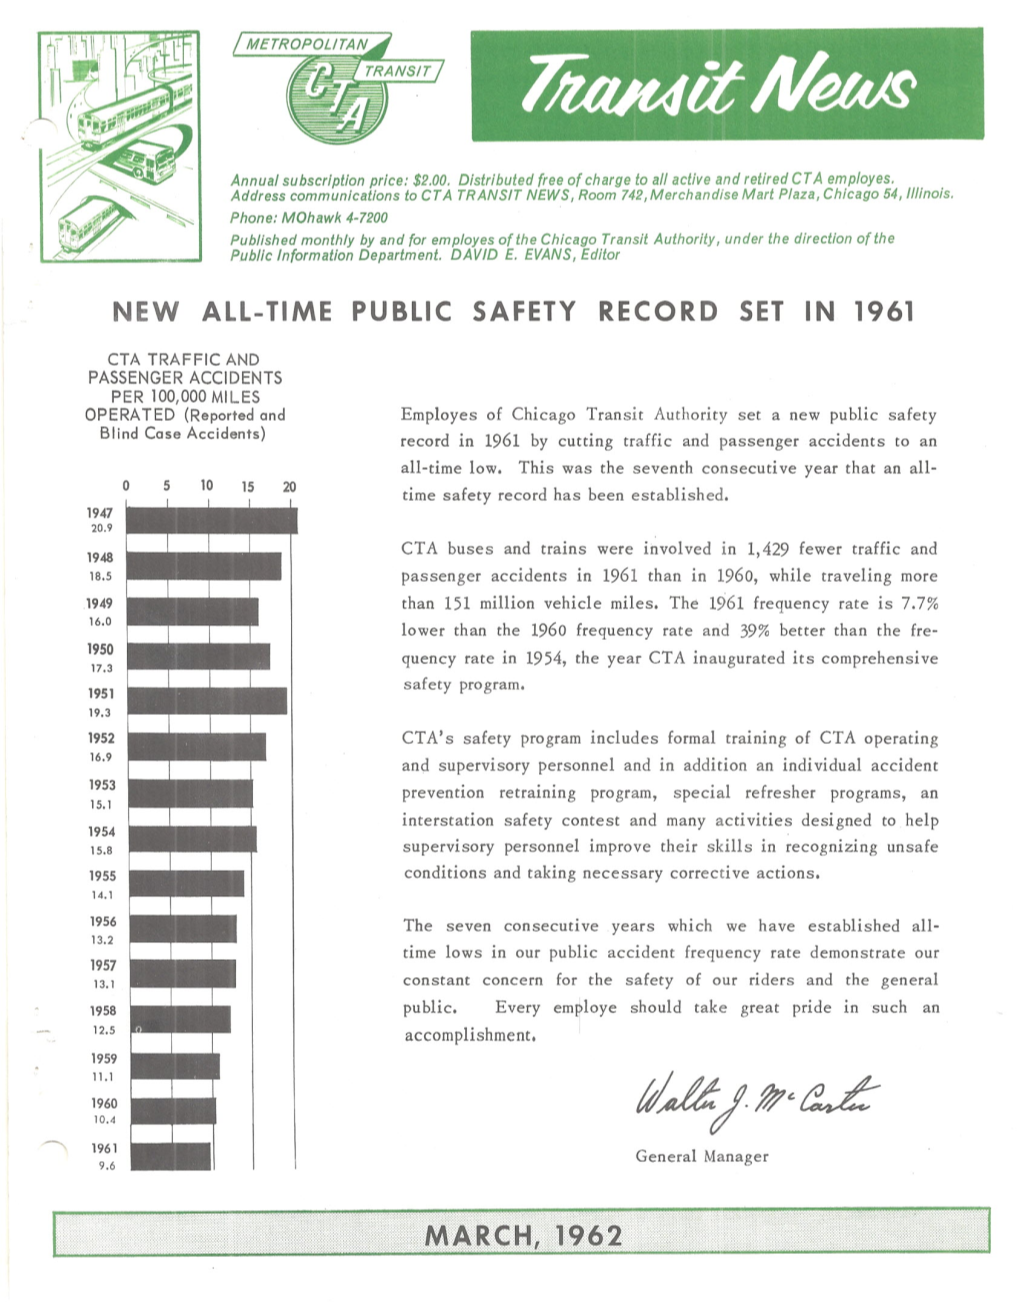 New All-Time Public Safety Record Set in 1961